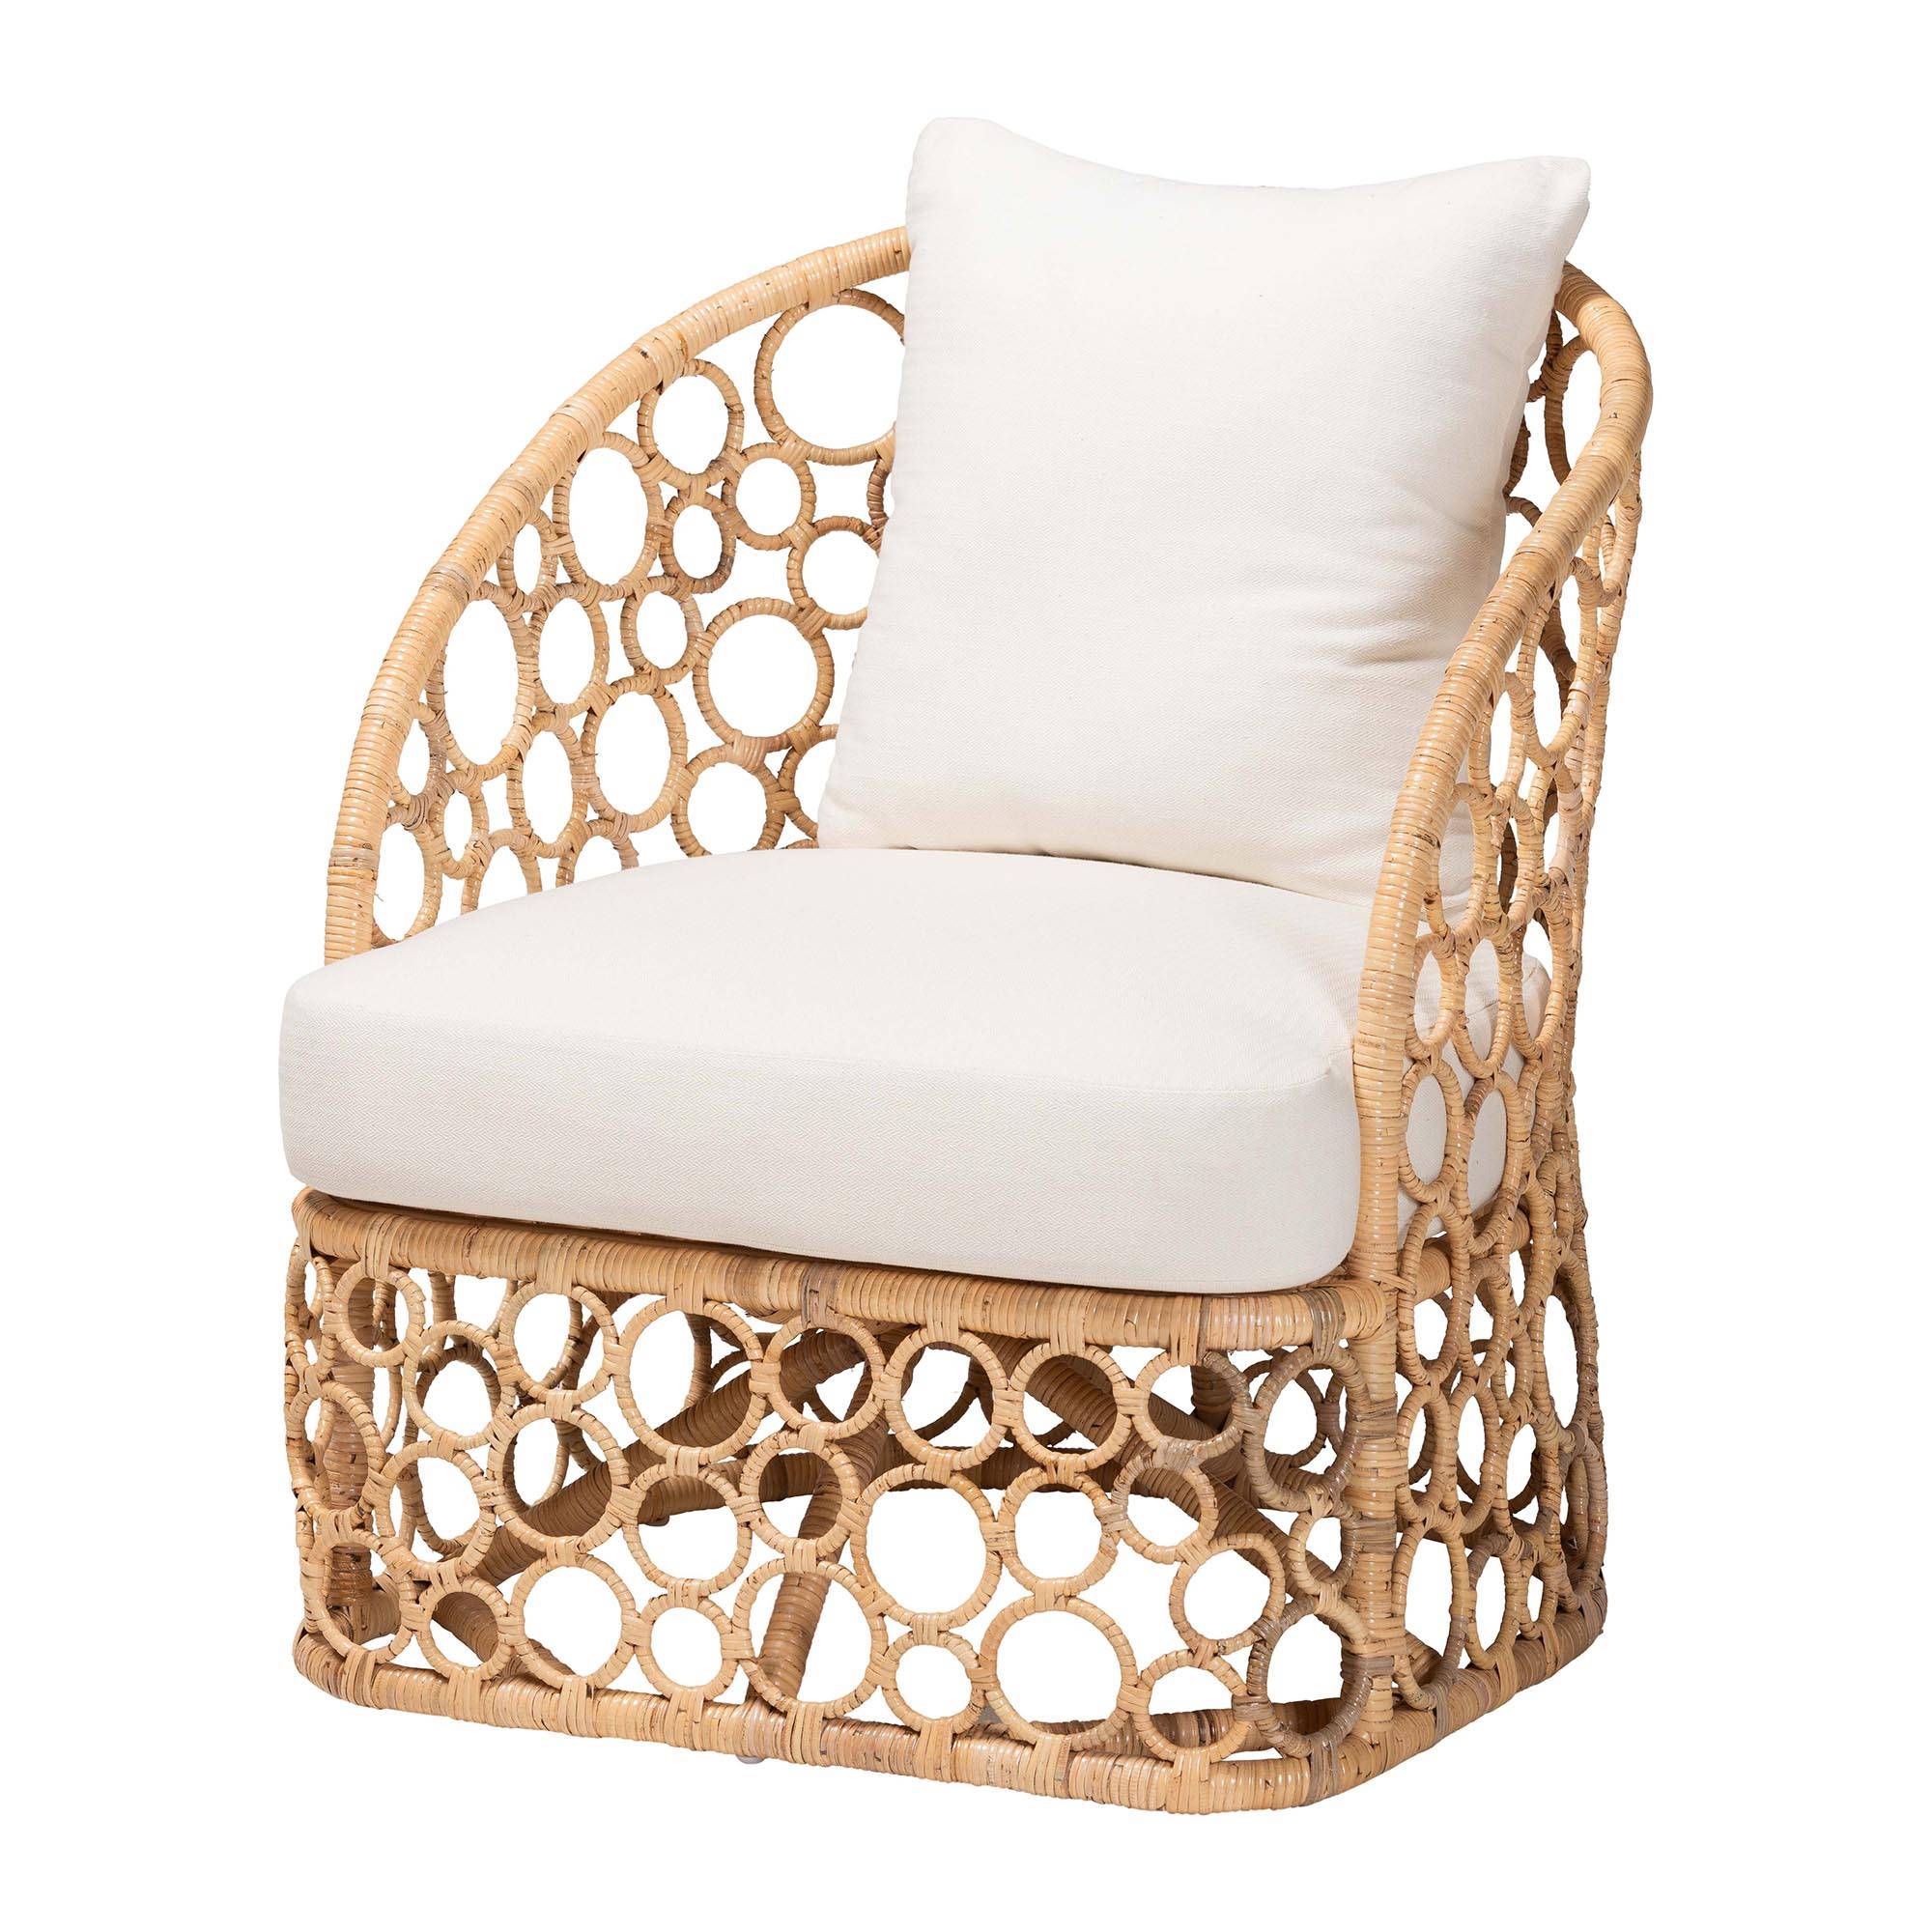 Exotic exuberance arrives in the stunning design of the Prisca accent chair. Made in Indonesia, this bohemian piece consists of handcrafted rattan meticulously arranged by skilled artisans.